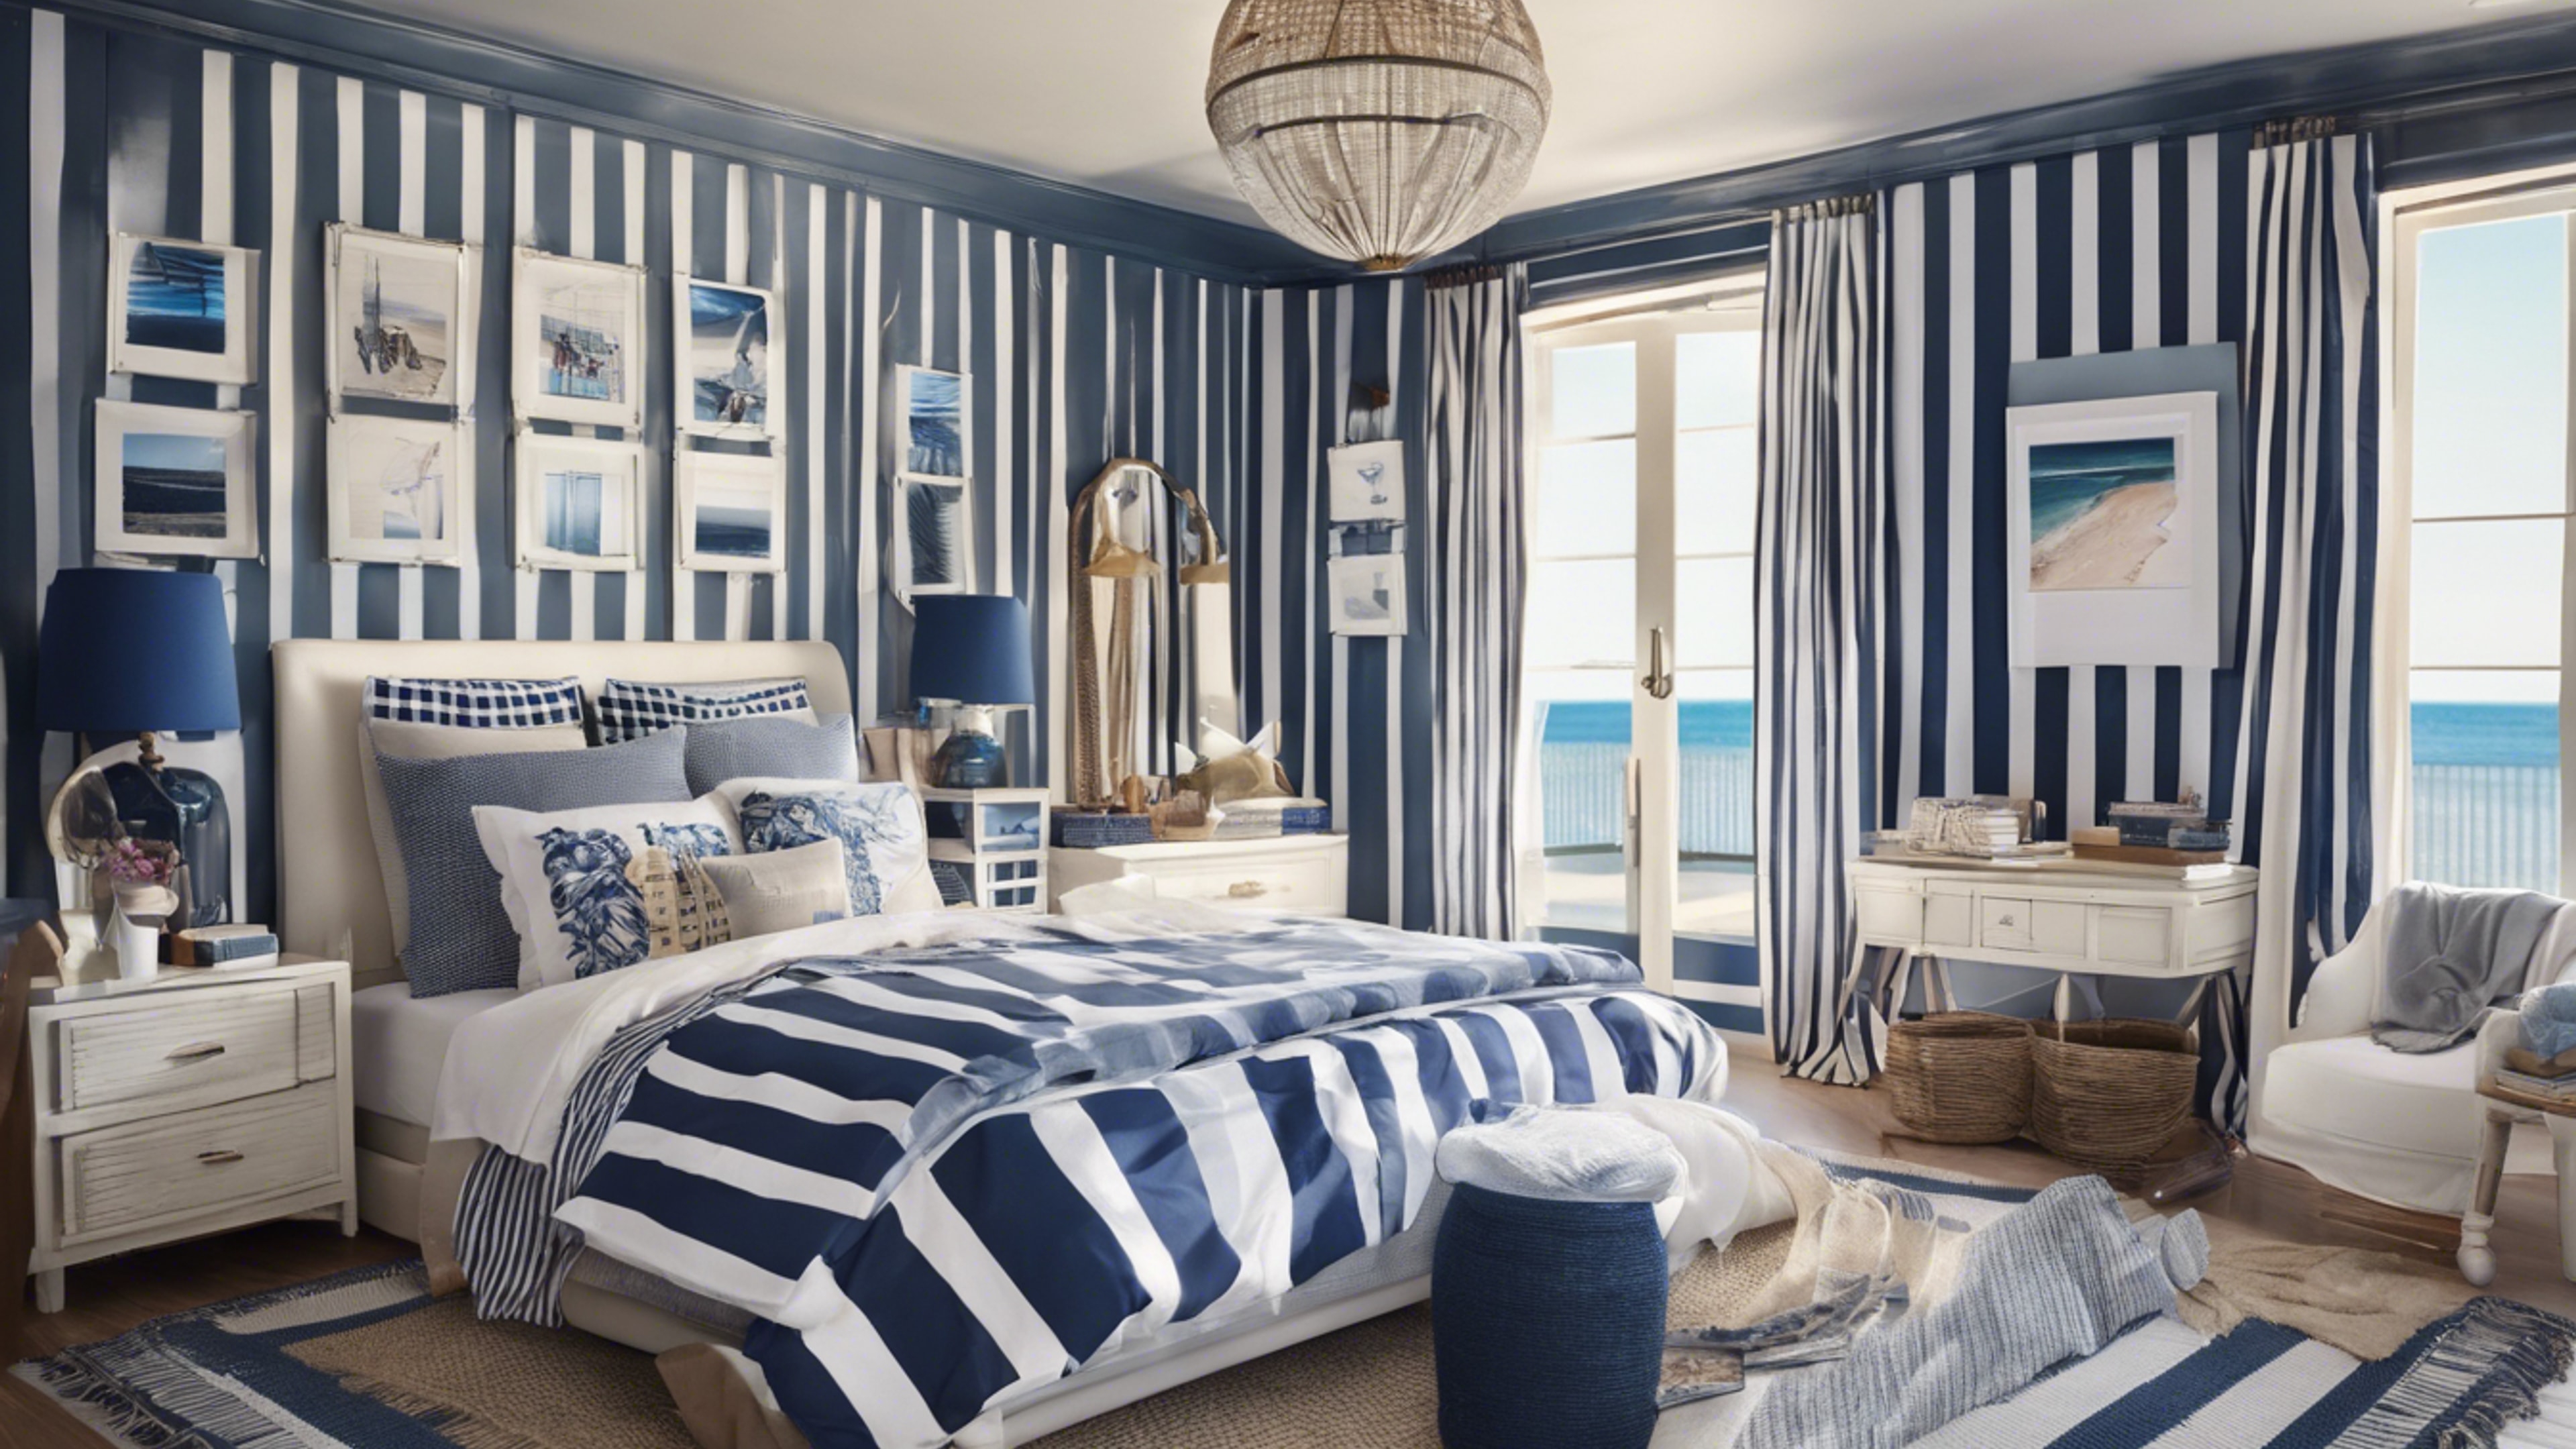 A relaxing preppy bedroom with a coastal charm, decorated with bold navy blue and white stripes, and summer beach elements.壁紙[35683537743b4598a571]